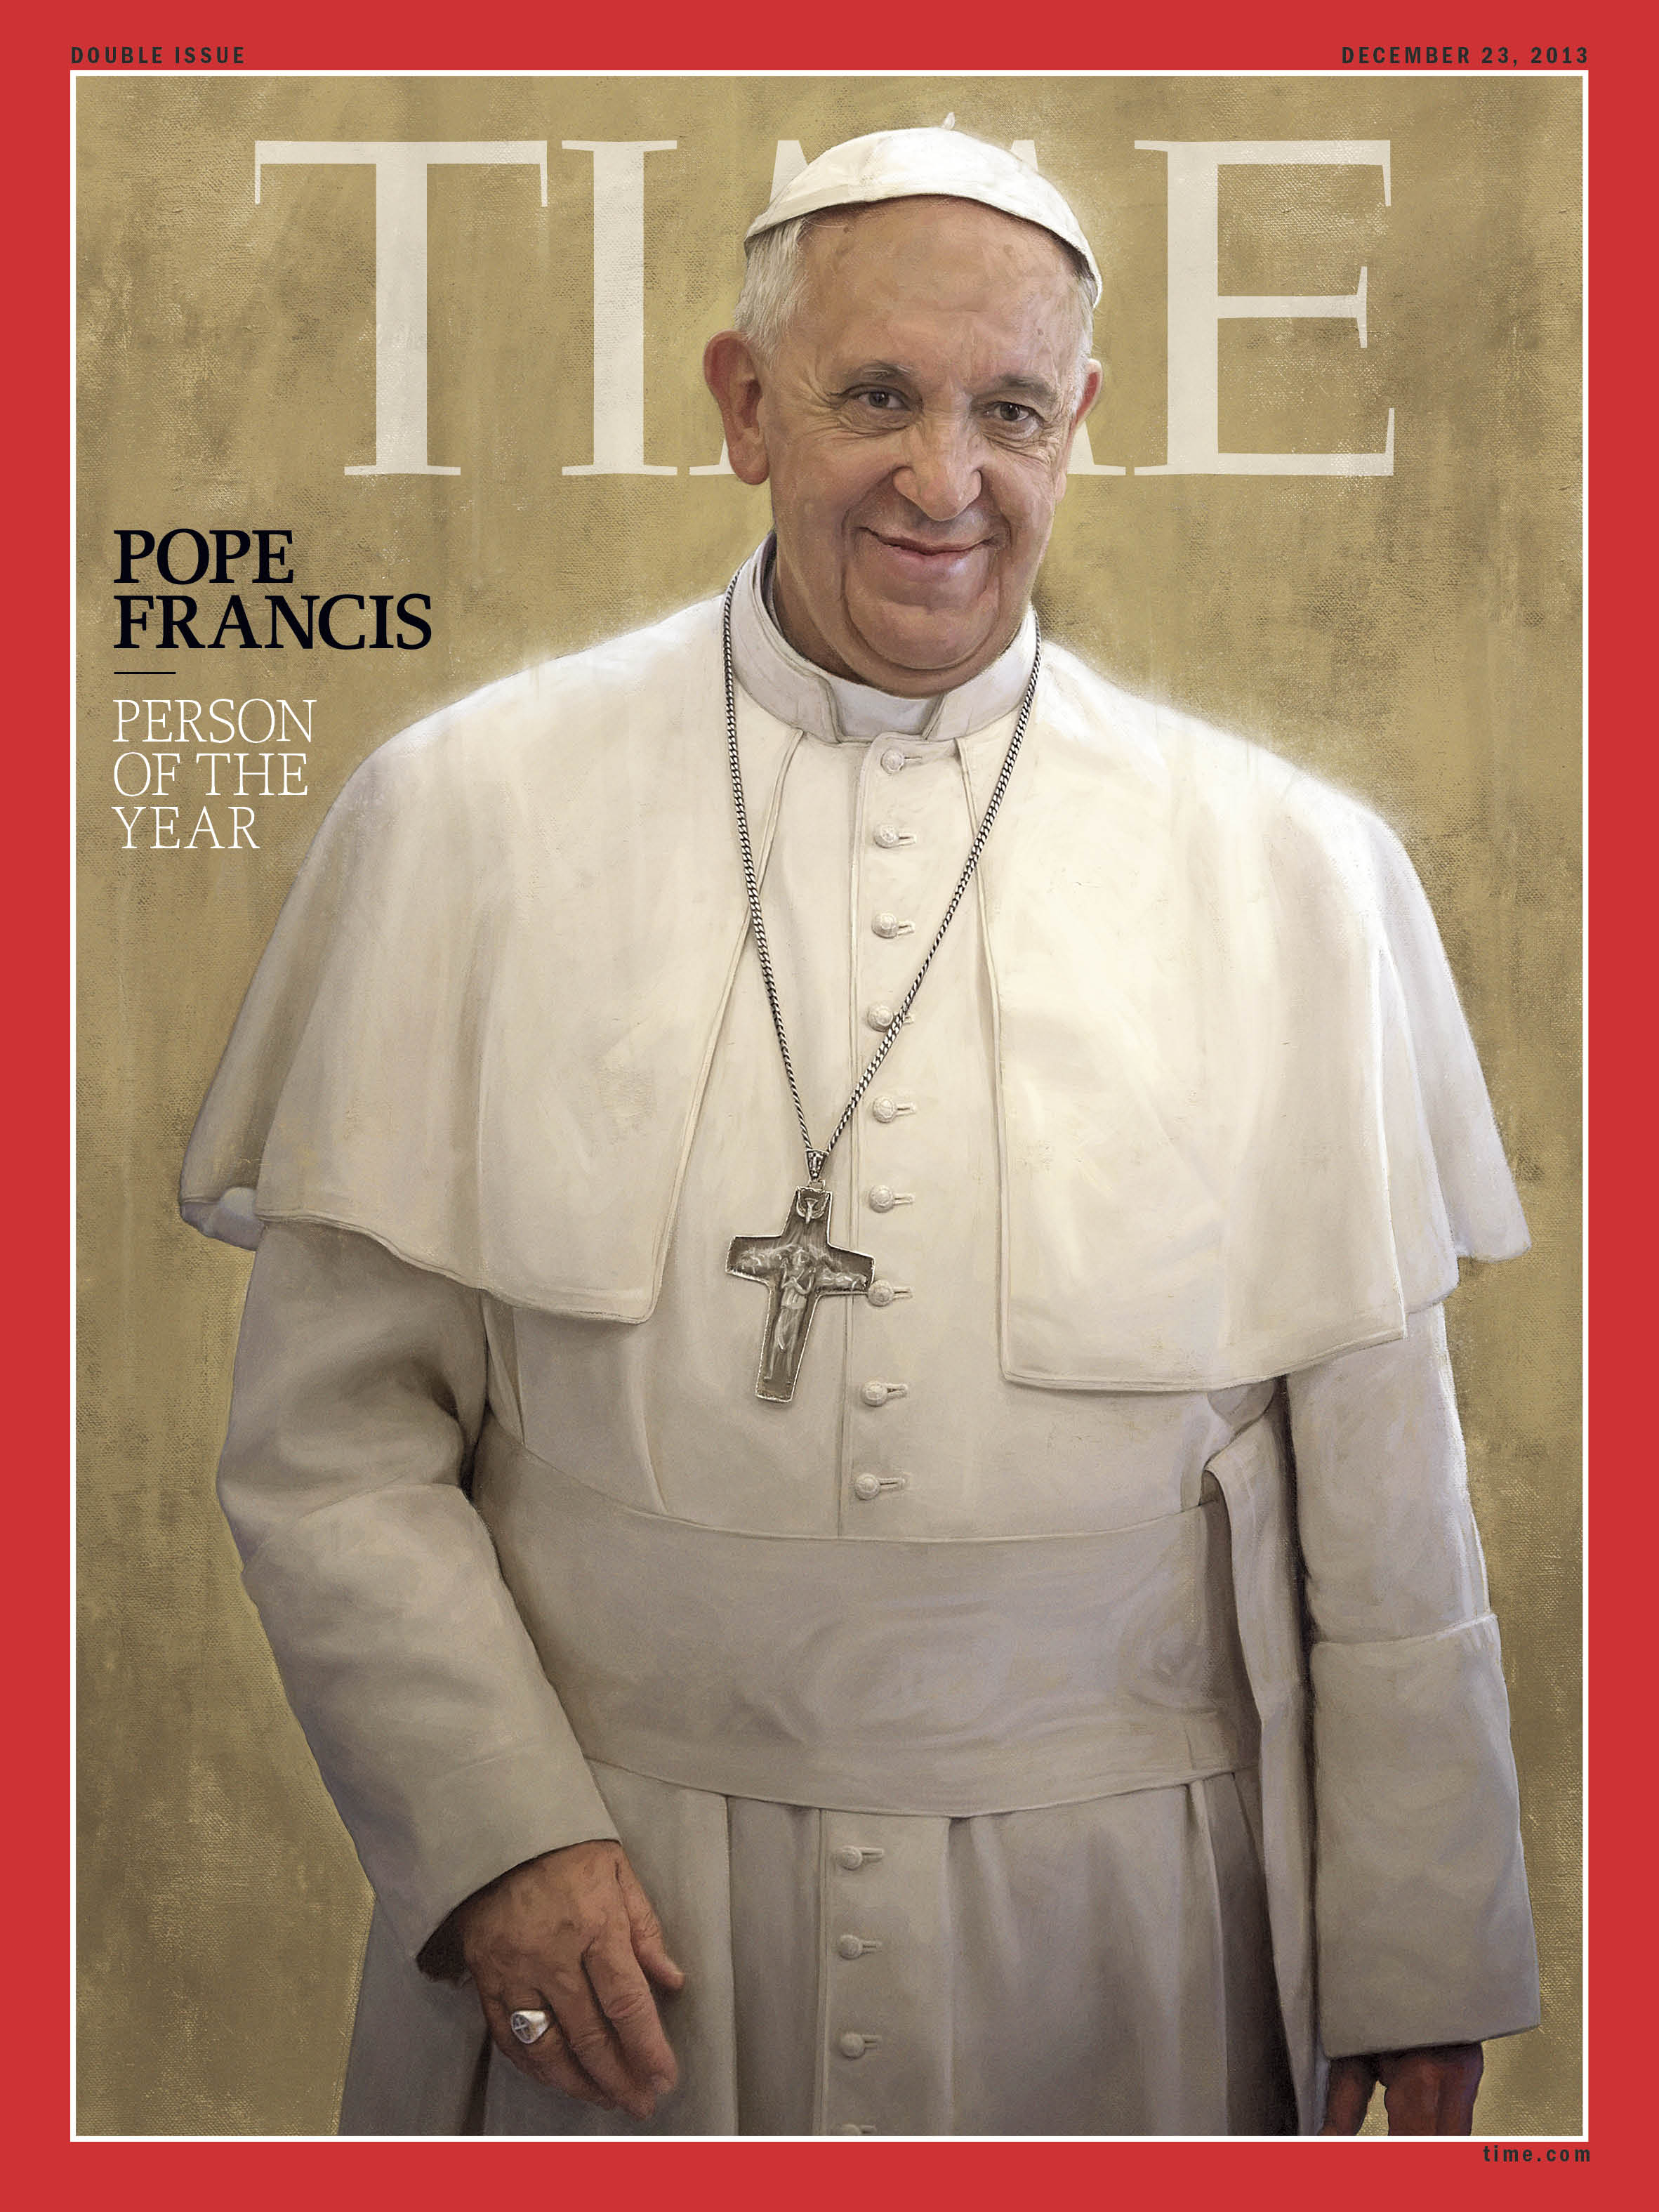 The Choice: Nancy Gibbs on Why Pope Is TIME's Person of the Year 2013 | TIME.com